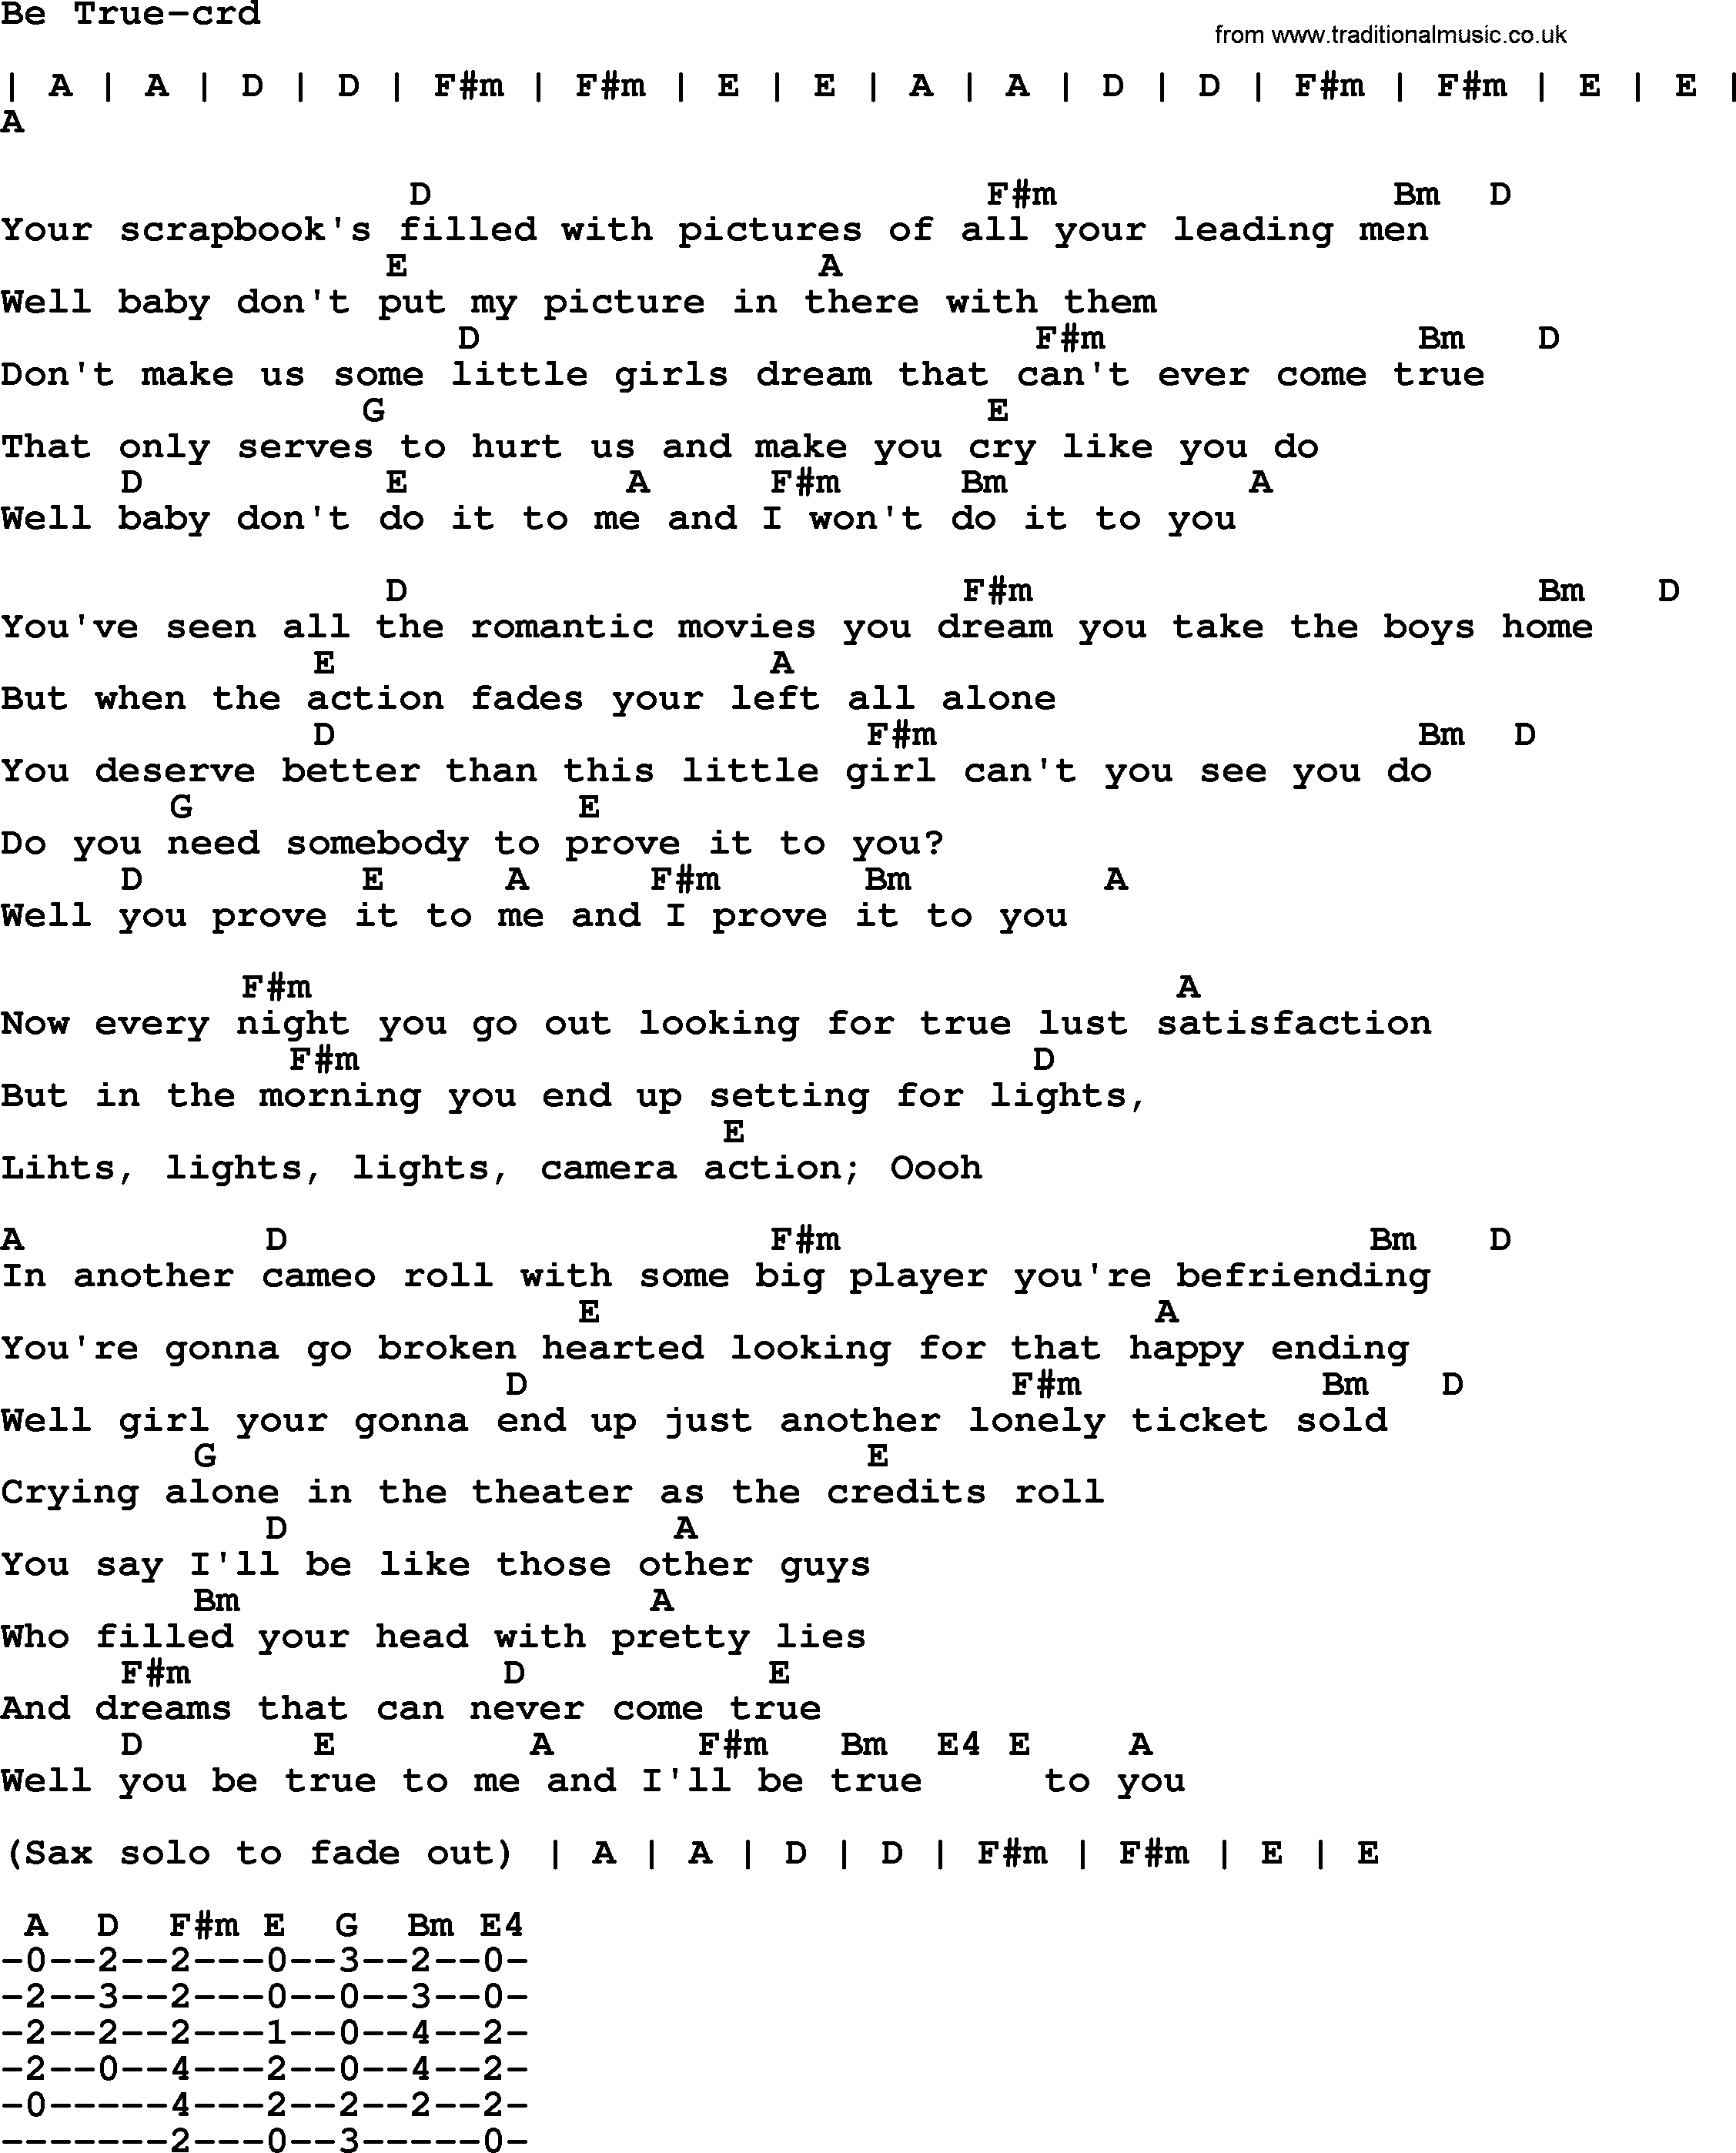 Bruce Springsteen song: Be True, lyrics and chords